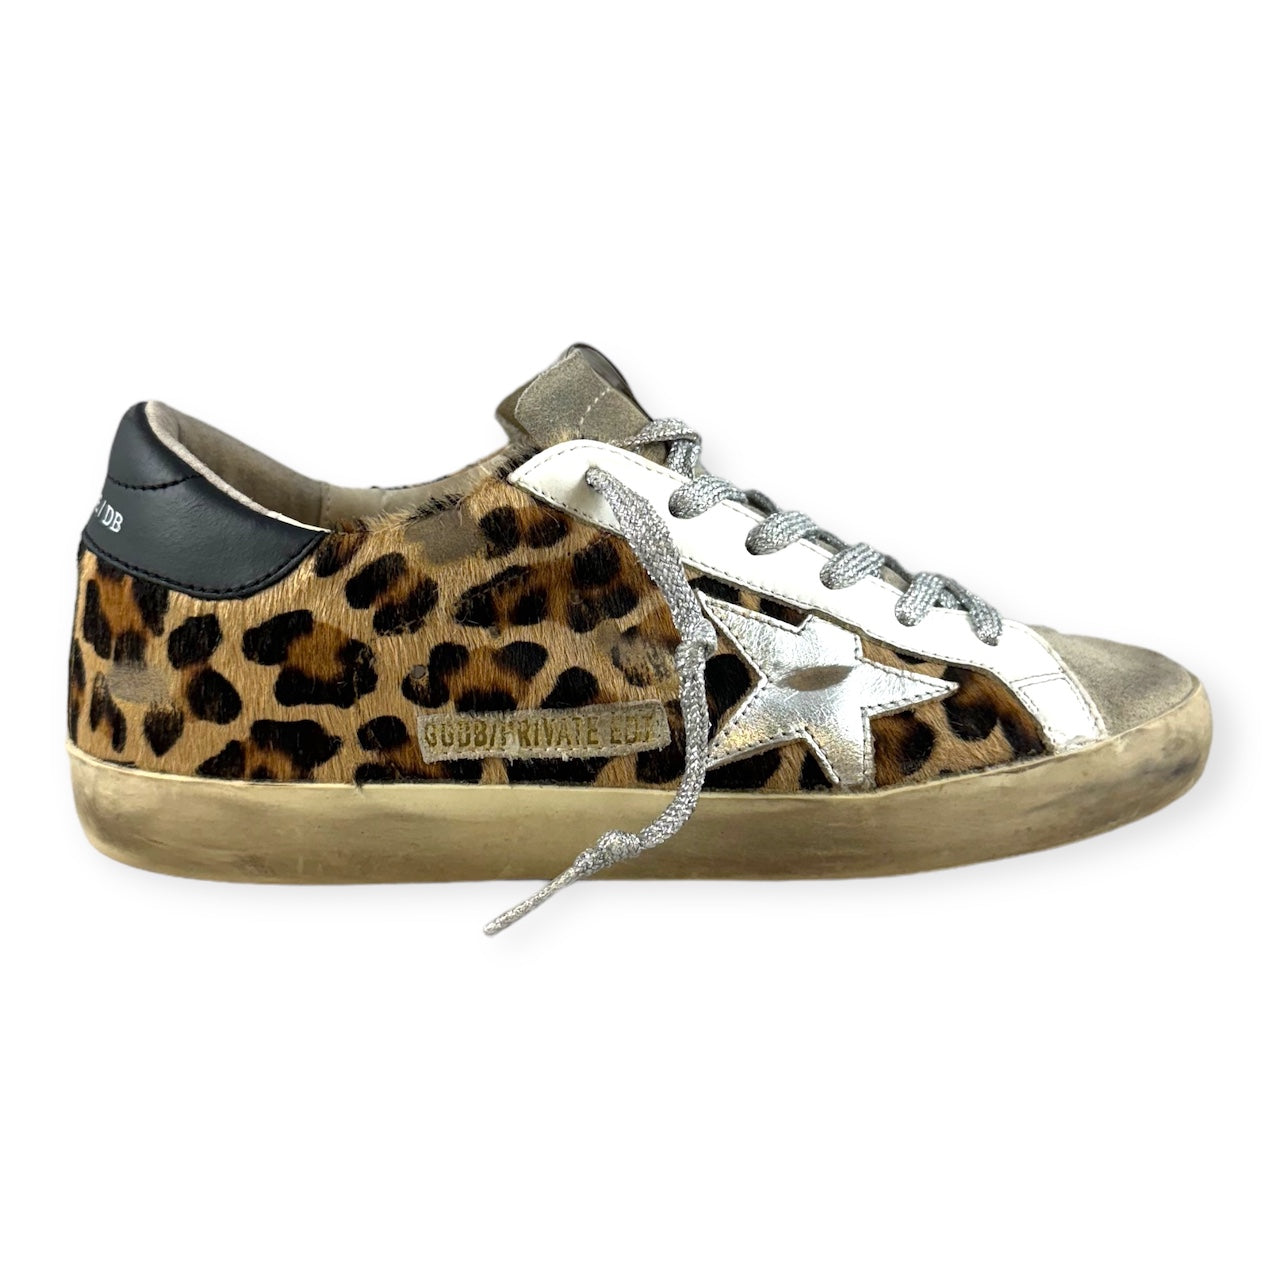 GOLDEN GOOSE Leopard Sneakers in Brown Silver | Size 38